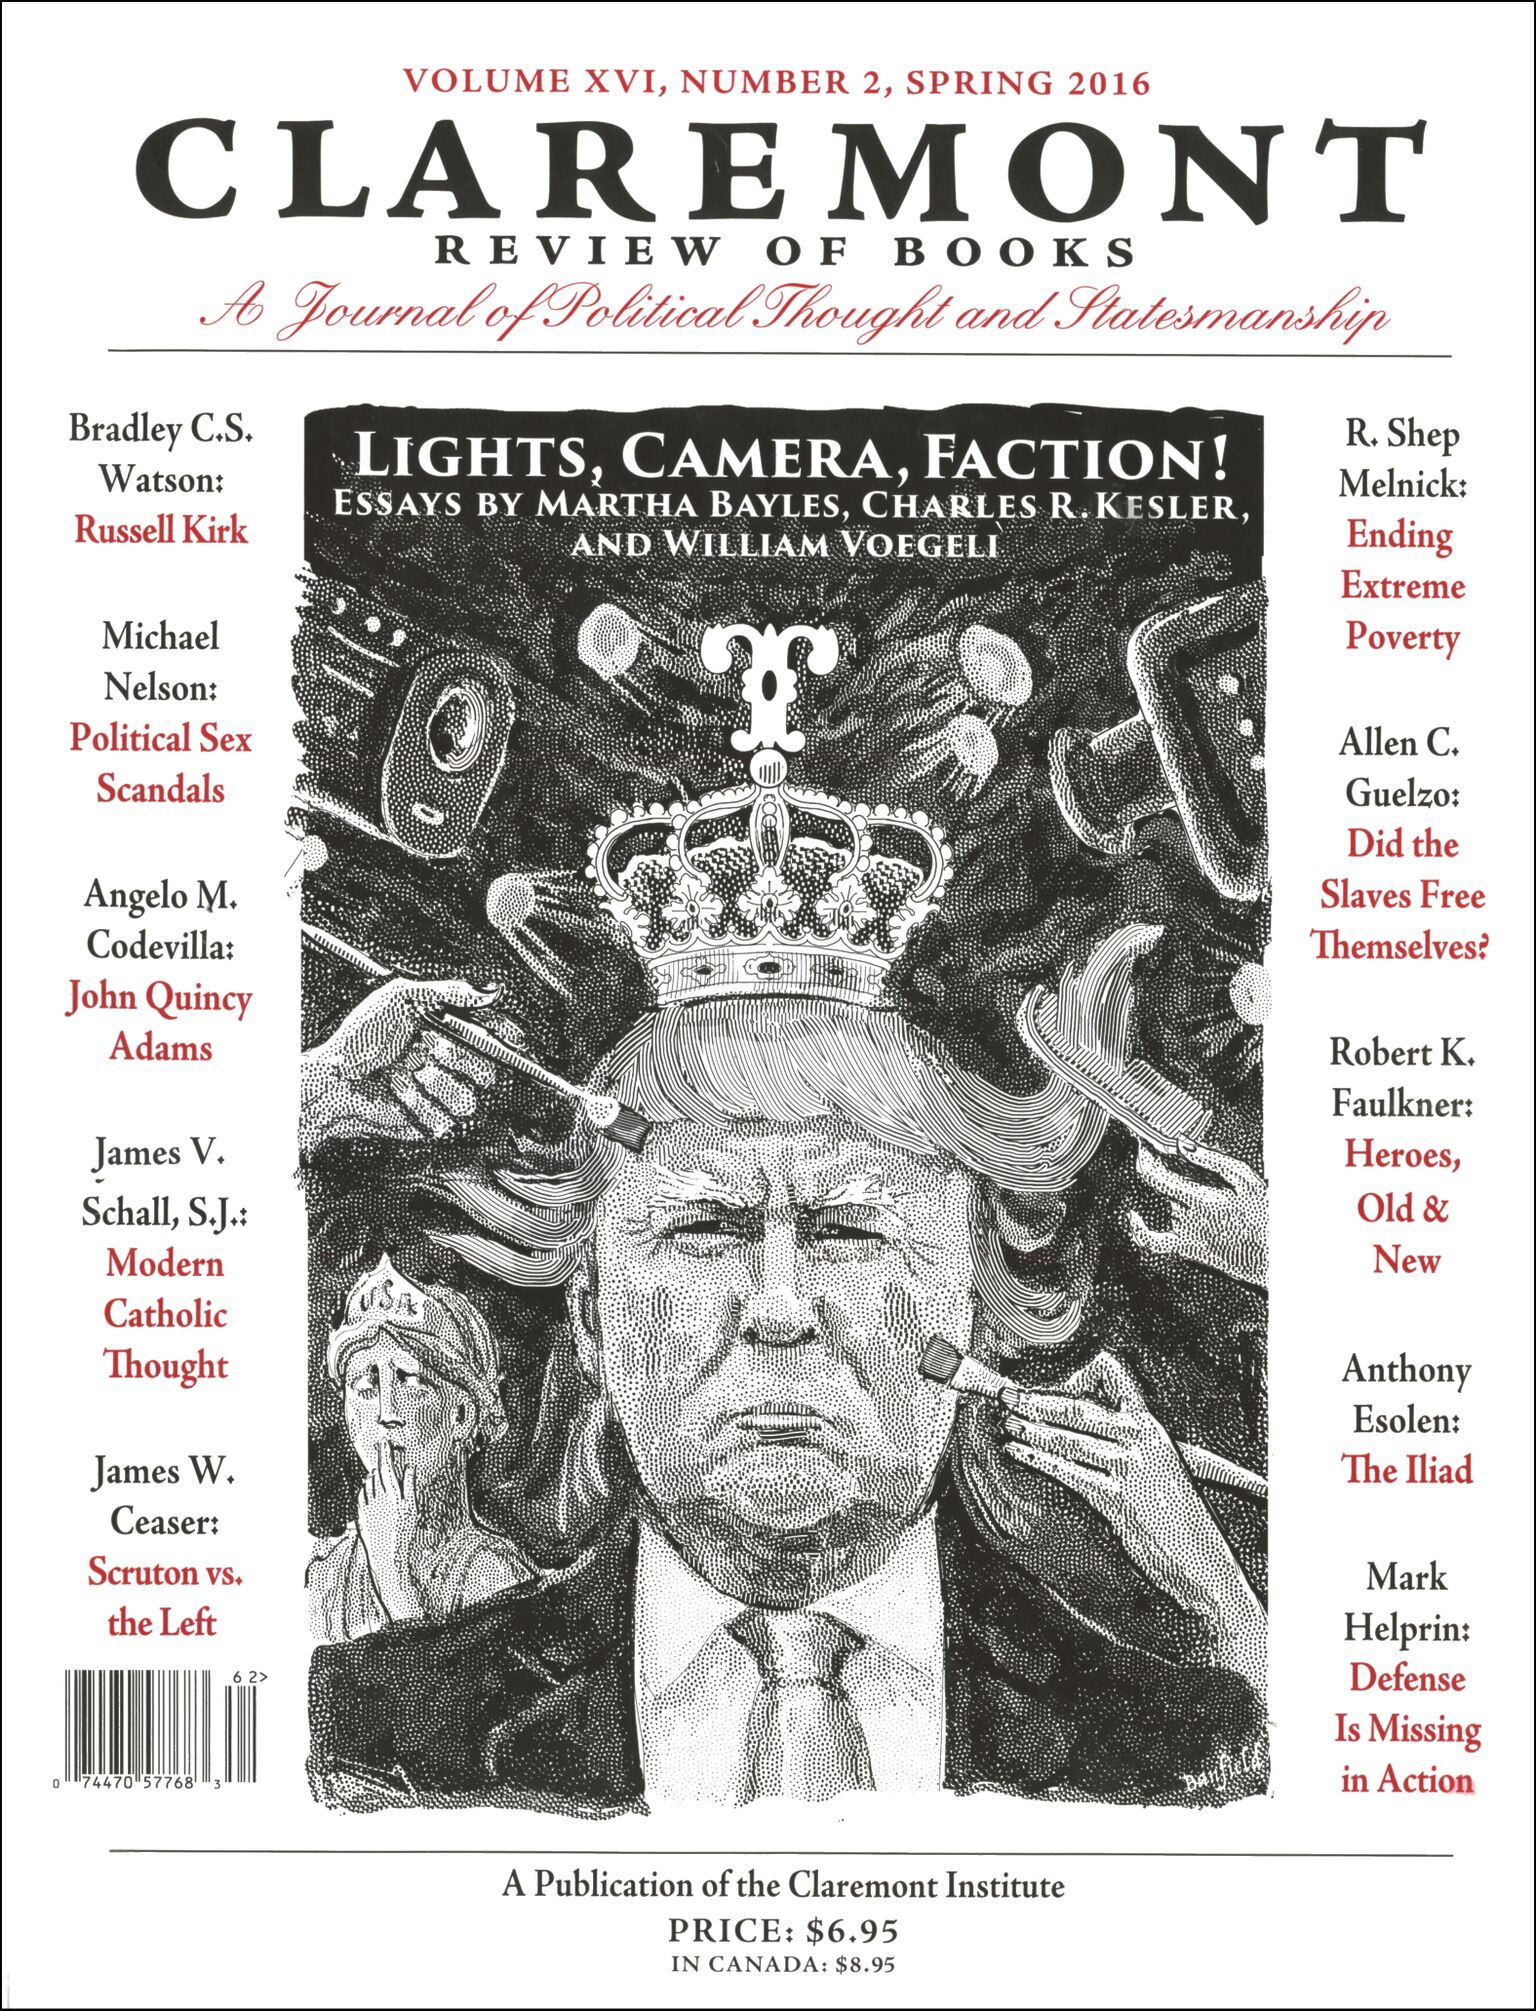 The cover of the spring 2016 issue of the Claremont Review of Books